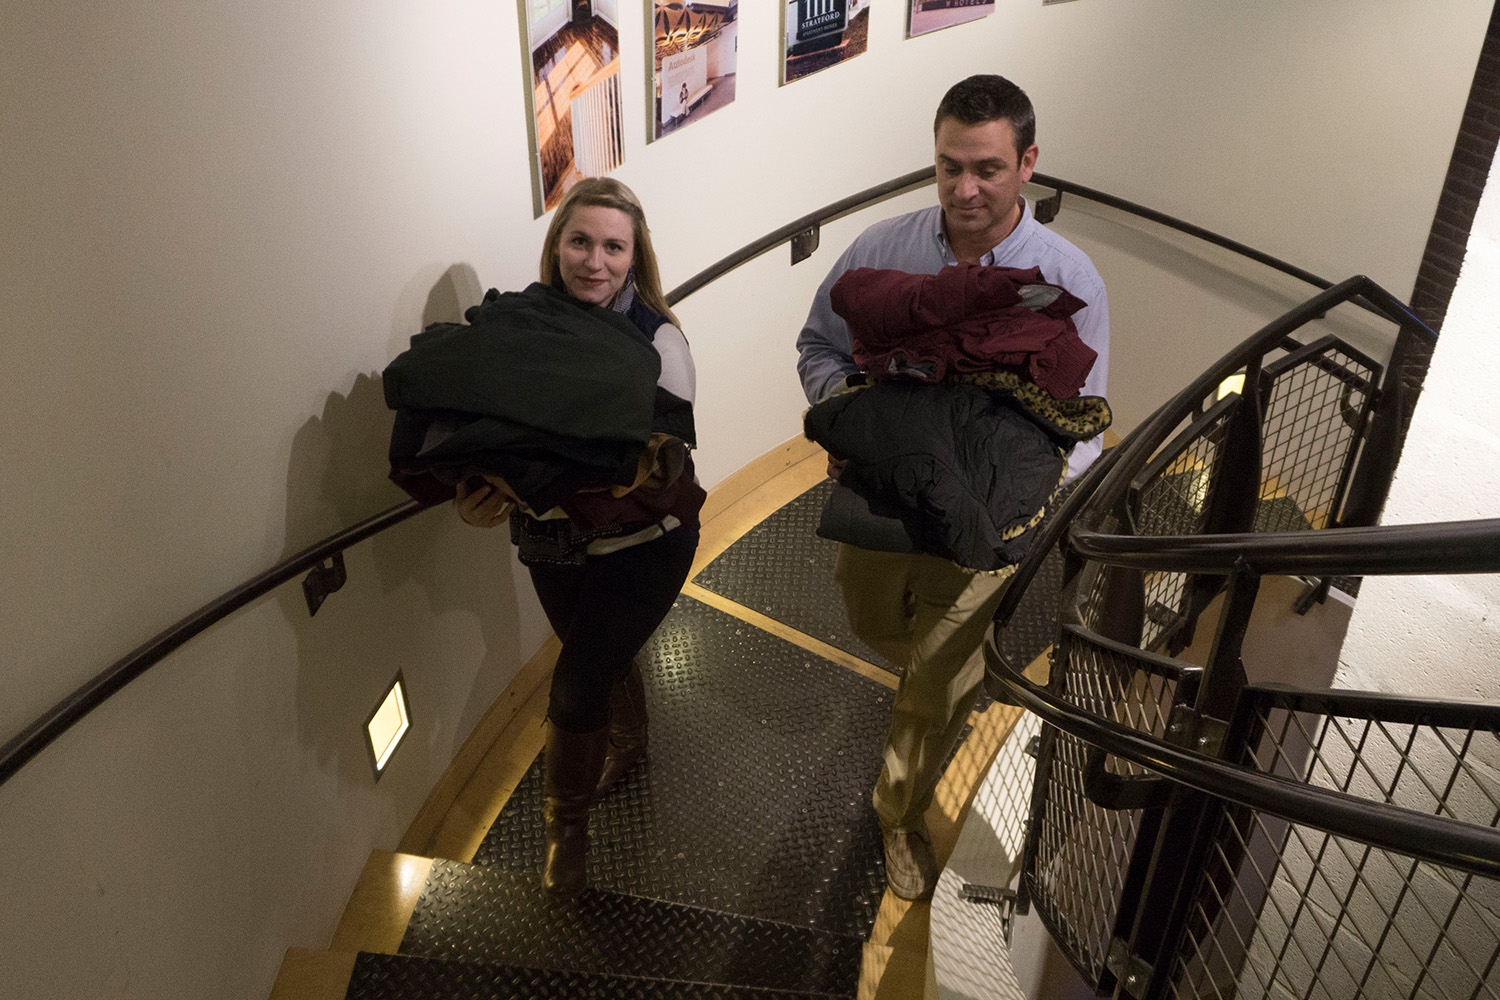 Two Tocci staff members walk up the stairs carrying coats for a coat donation drive